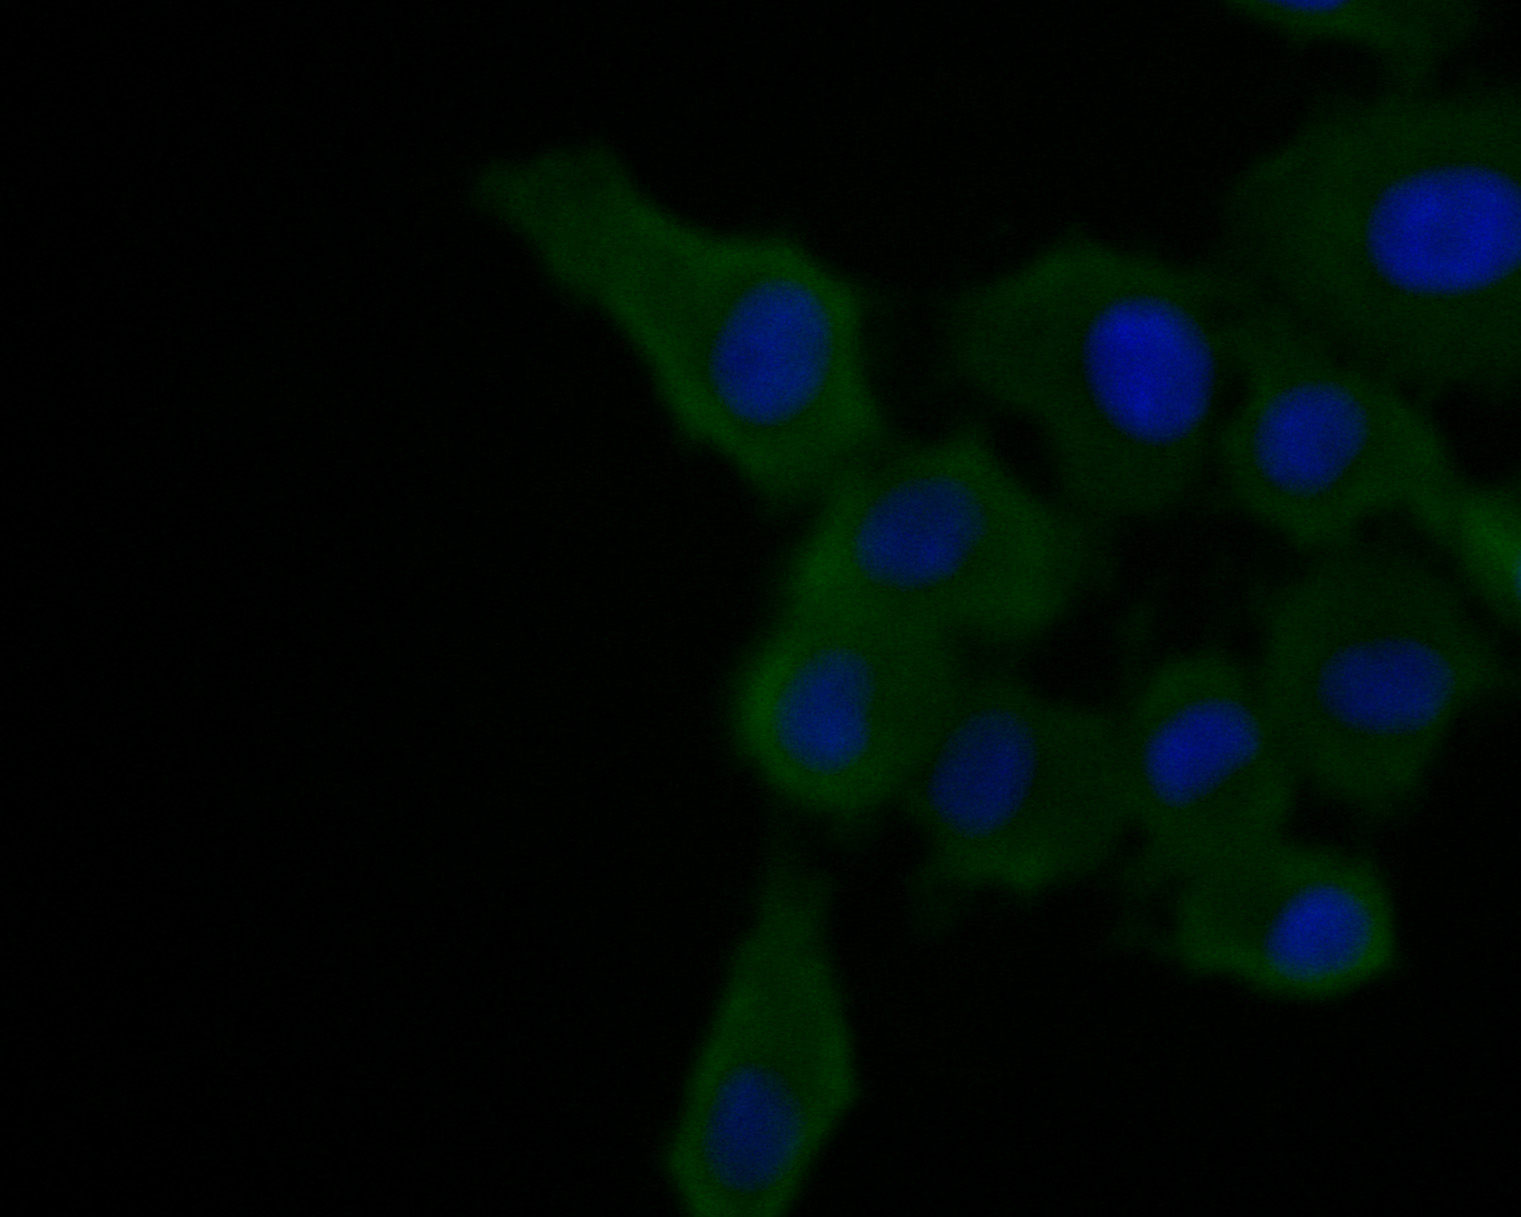 Fig4:; ICC staining of Alpha-2-macroglobulin in HepG2 cells (green). Formalin fixed cells were permeabilized with 0.1% Triton X-100 in TBS for 10 minutes at room temperature and blocked with 1% Blocker BSA for 15 minutes at room temperature. Cells were probed with the primary antibody ( 1/100) for 1 hour at room temperature, washed with PBS. Alexa Fluor®488 Goat anti-Rabbit IgG was used as the secondary antibody at 1/1,000 dilution. The nuclear counter stain is DAPI (blue).